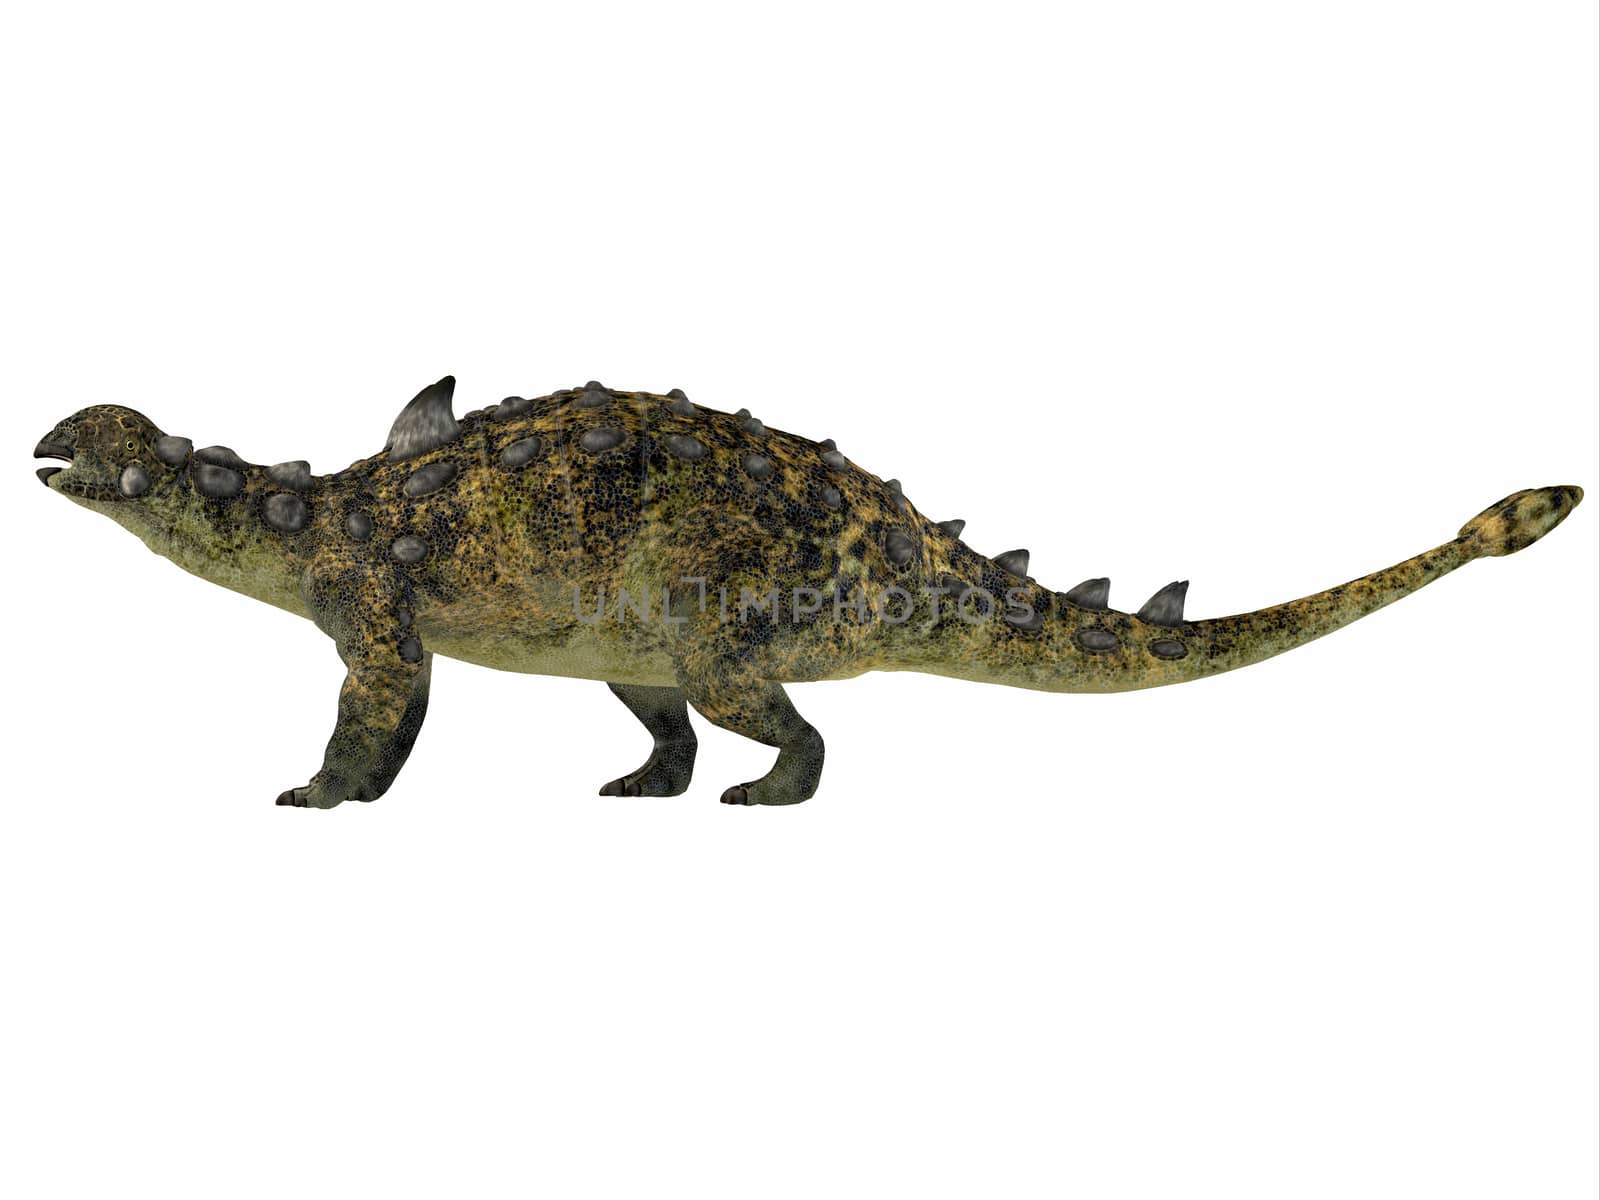 Euoplocephalus was a armored herbivorous dinosaur that lived in the Cretaceous Period of Canada. 